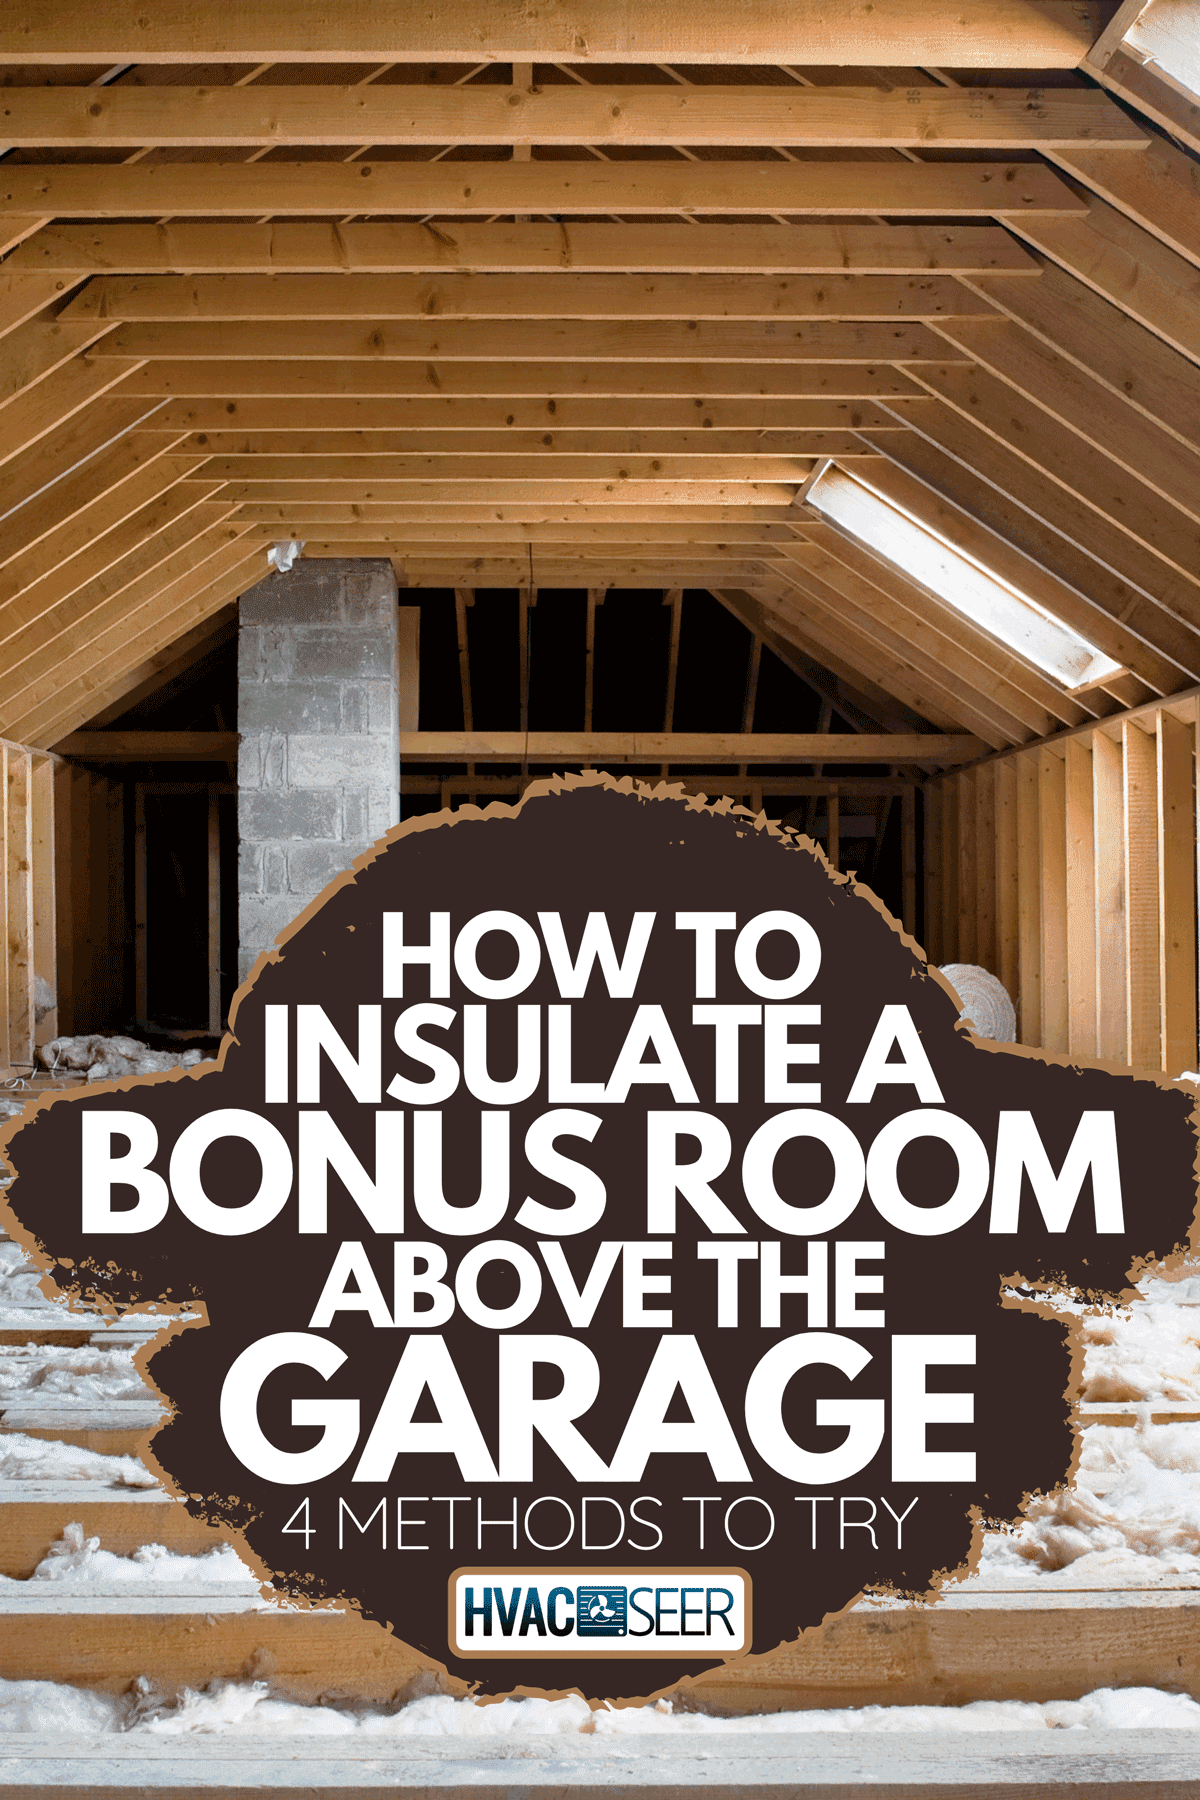 Insulating a room over the garage, How To Insulate A Bonus Room Above The Garage - 4 Methods To Try